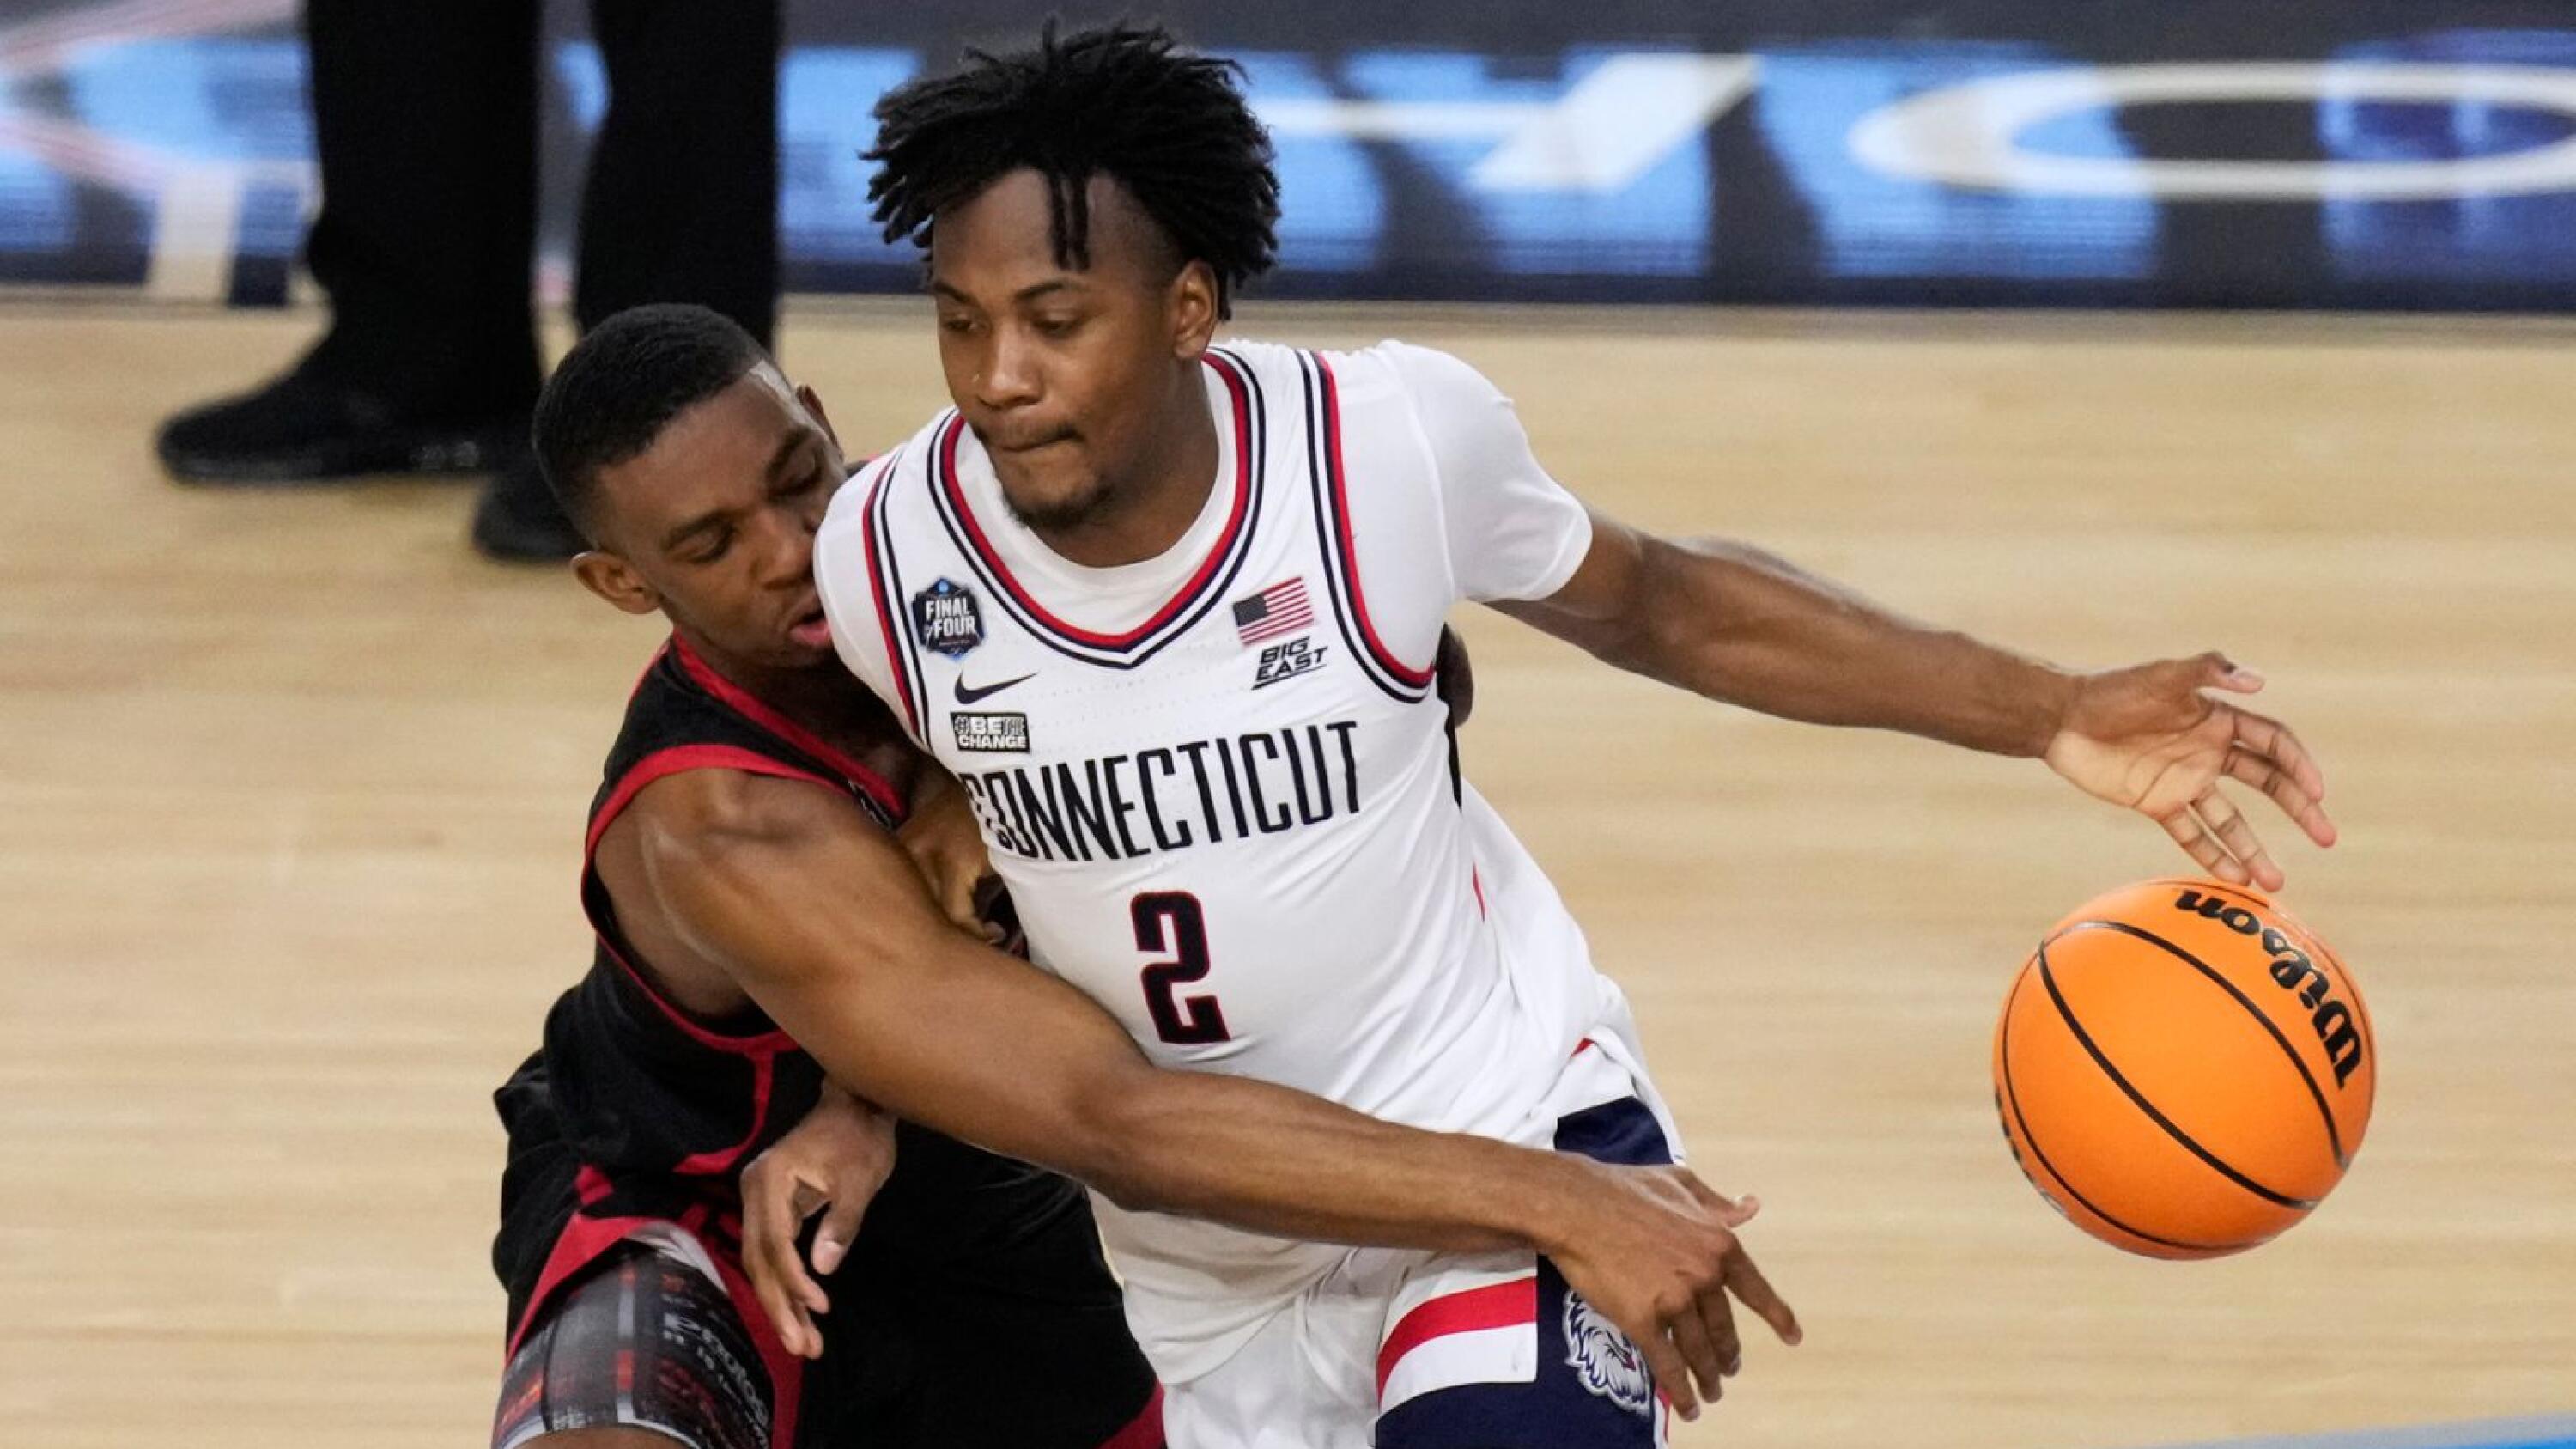 Connecticut beats Butler to win NCAA championship